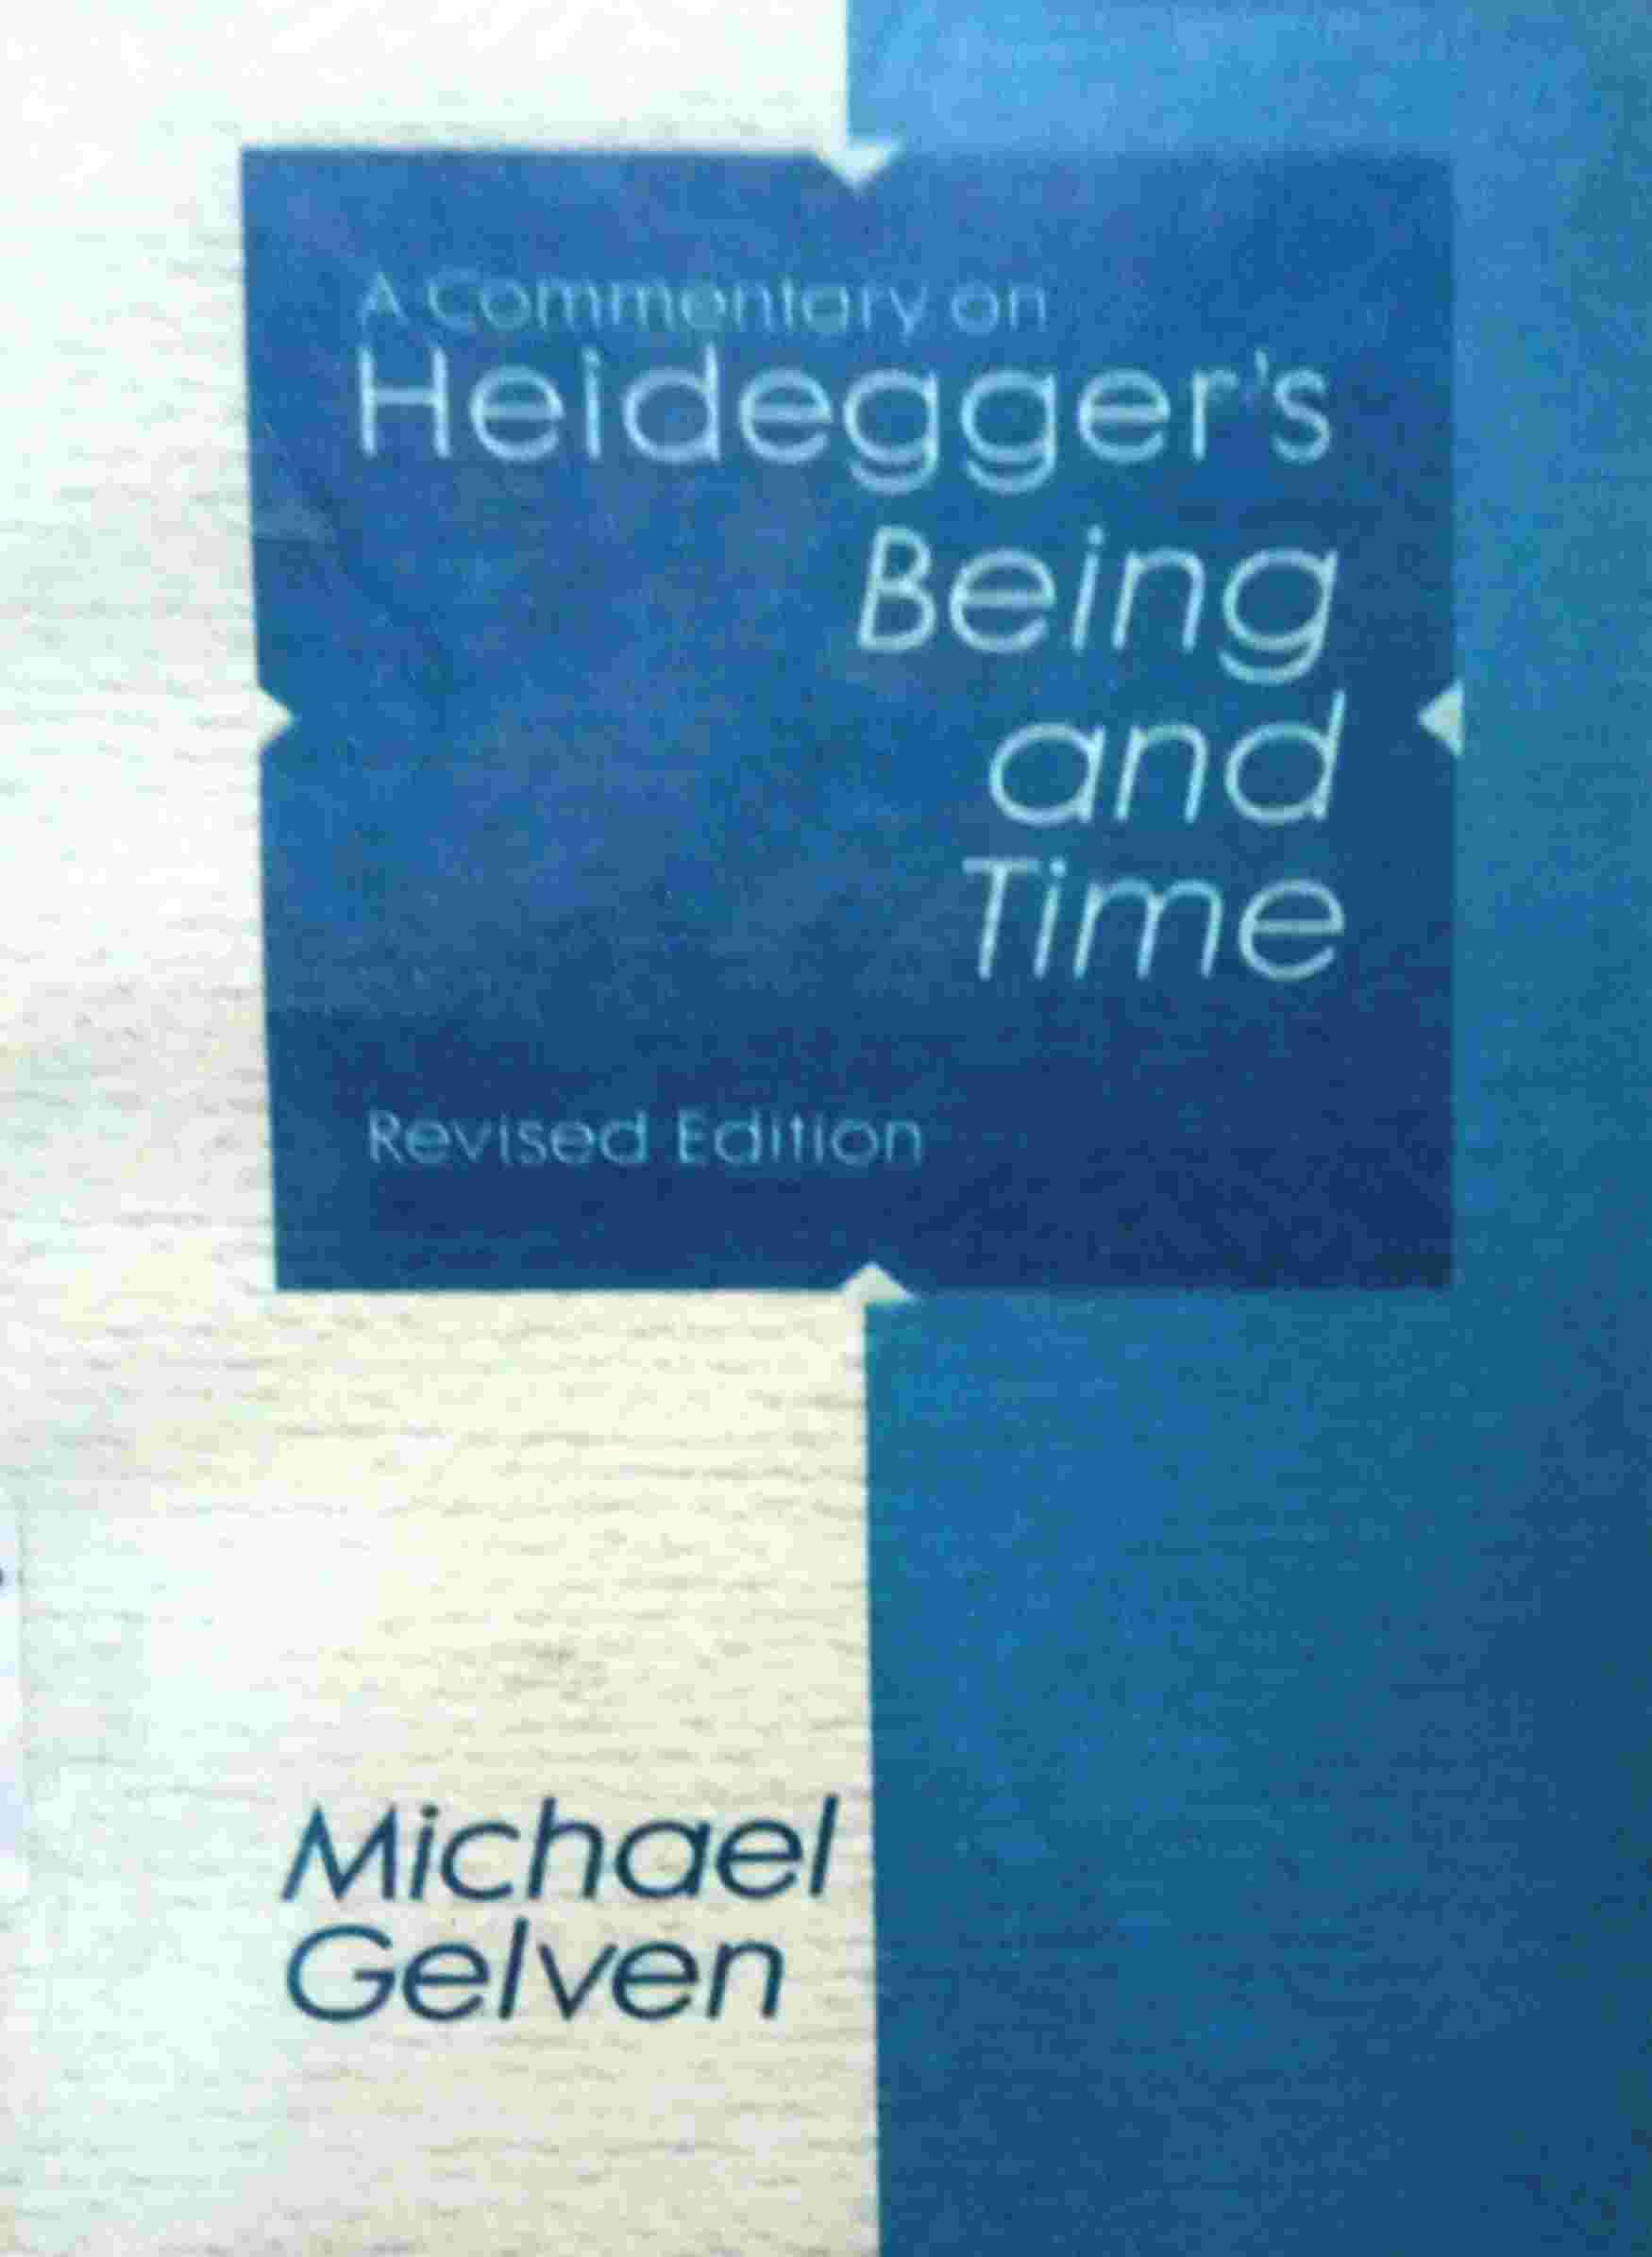 A COMMENTARY ON HEIDEGGER's BEING AND TIME